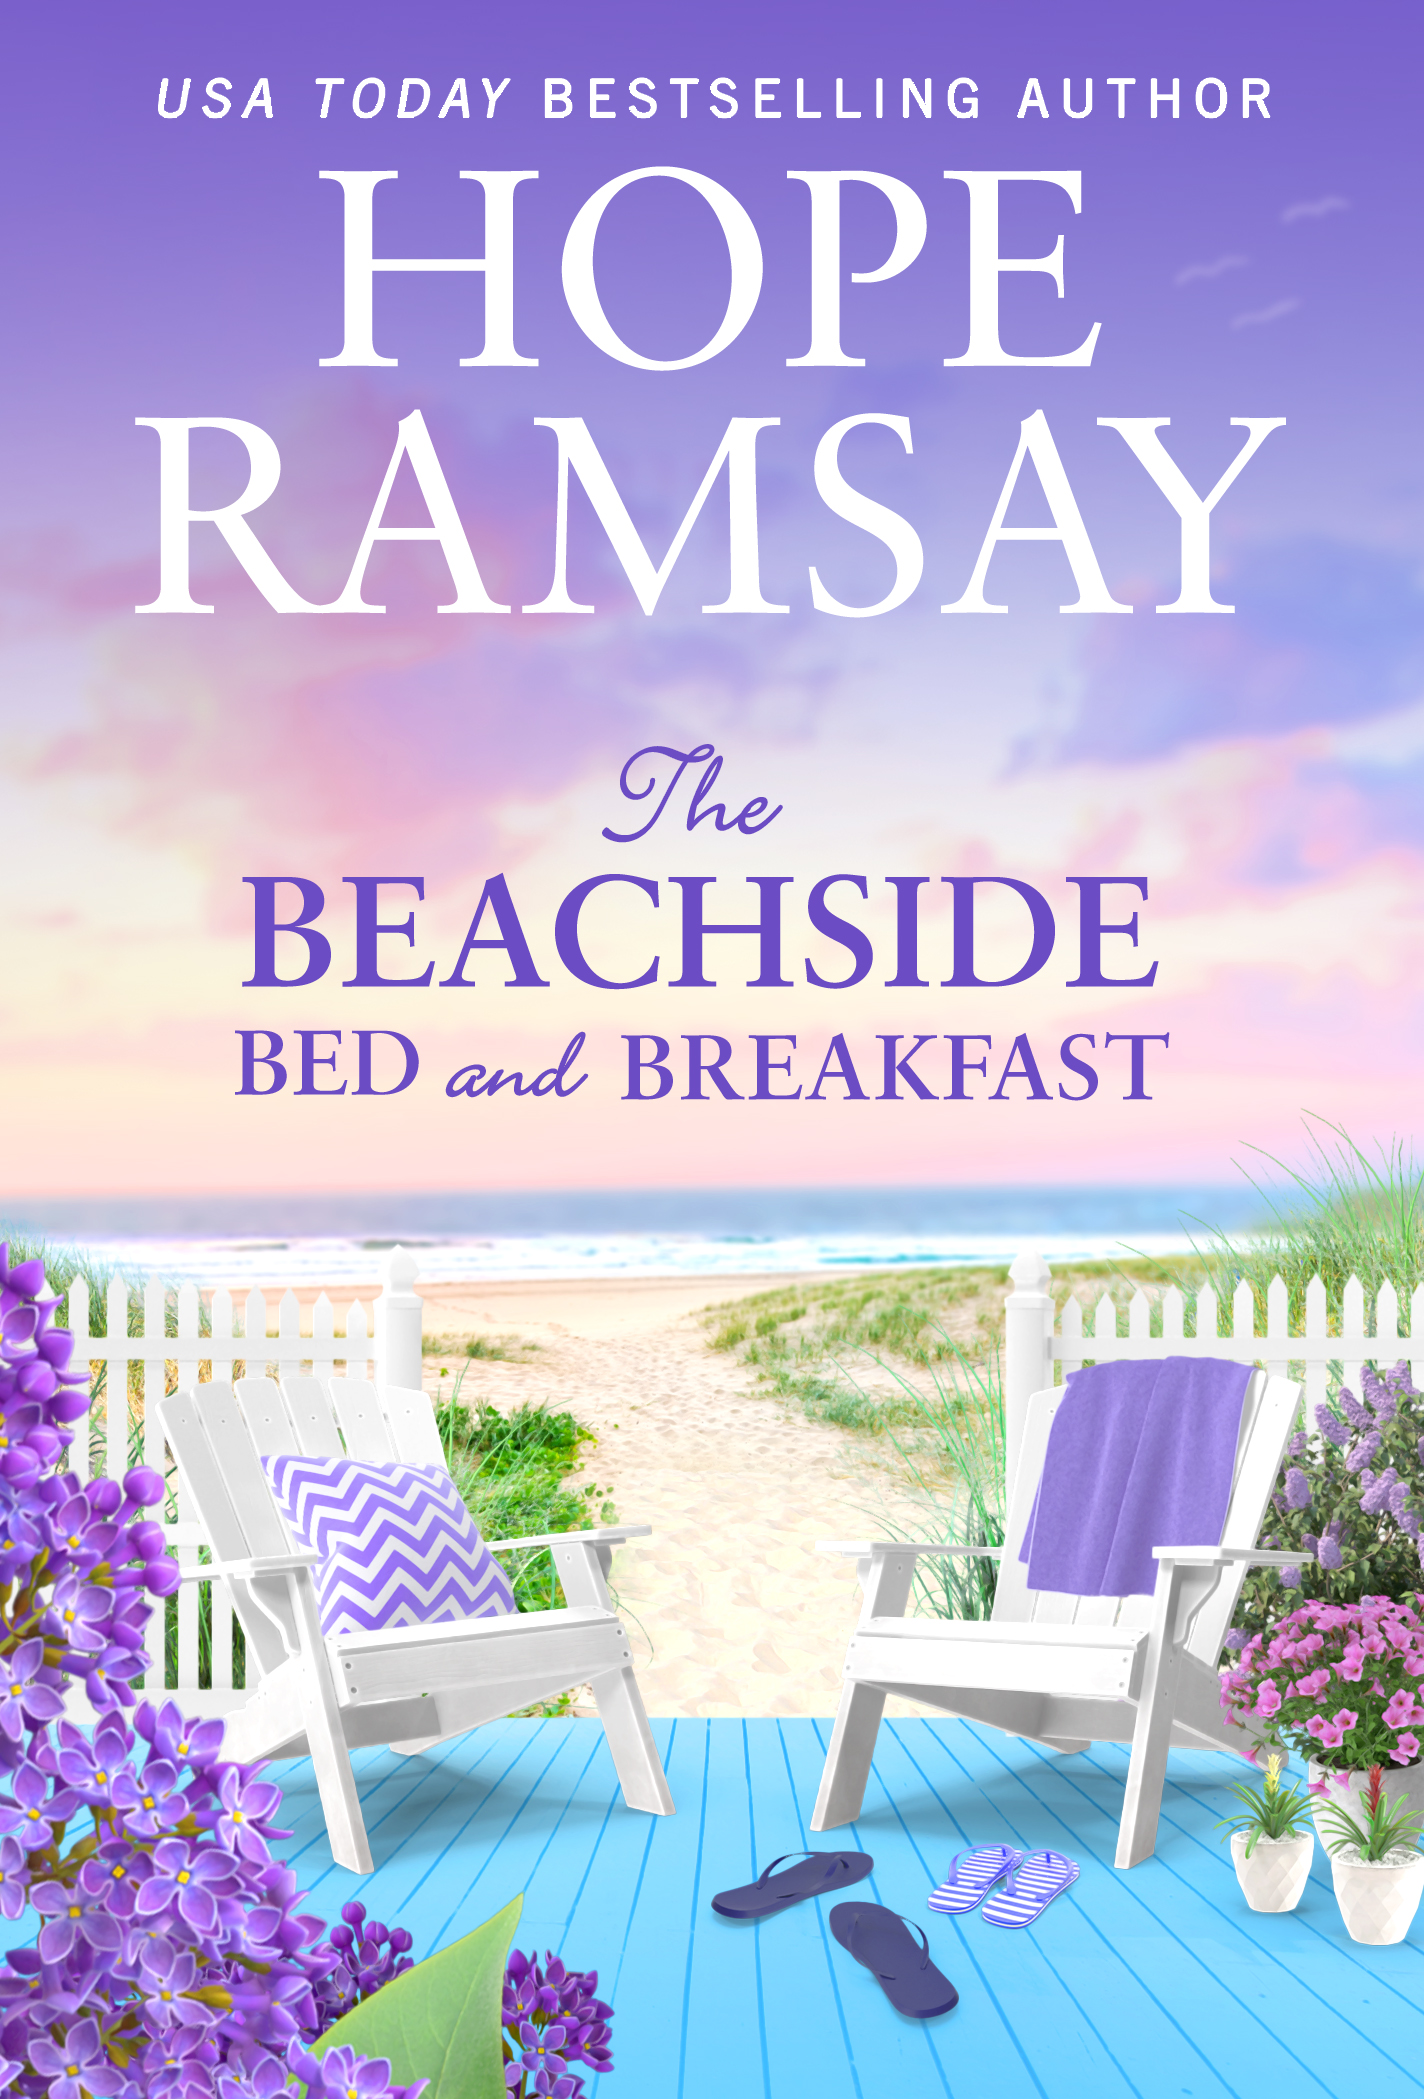 Beachside Bed and Breakfast